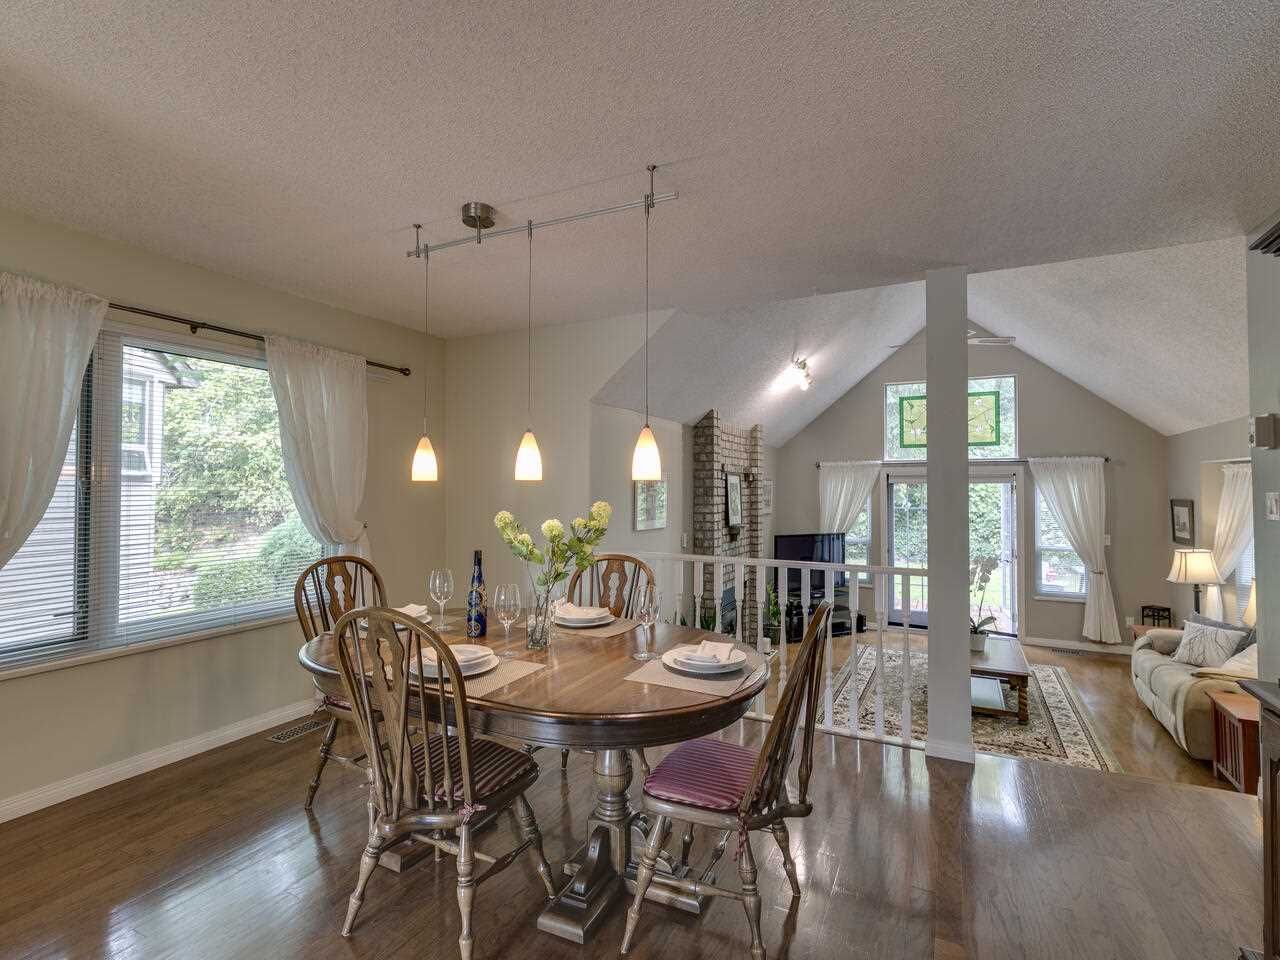 Dining room overlooking vaulted, sunken living room with access to wrap around deck.